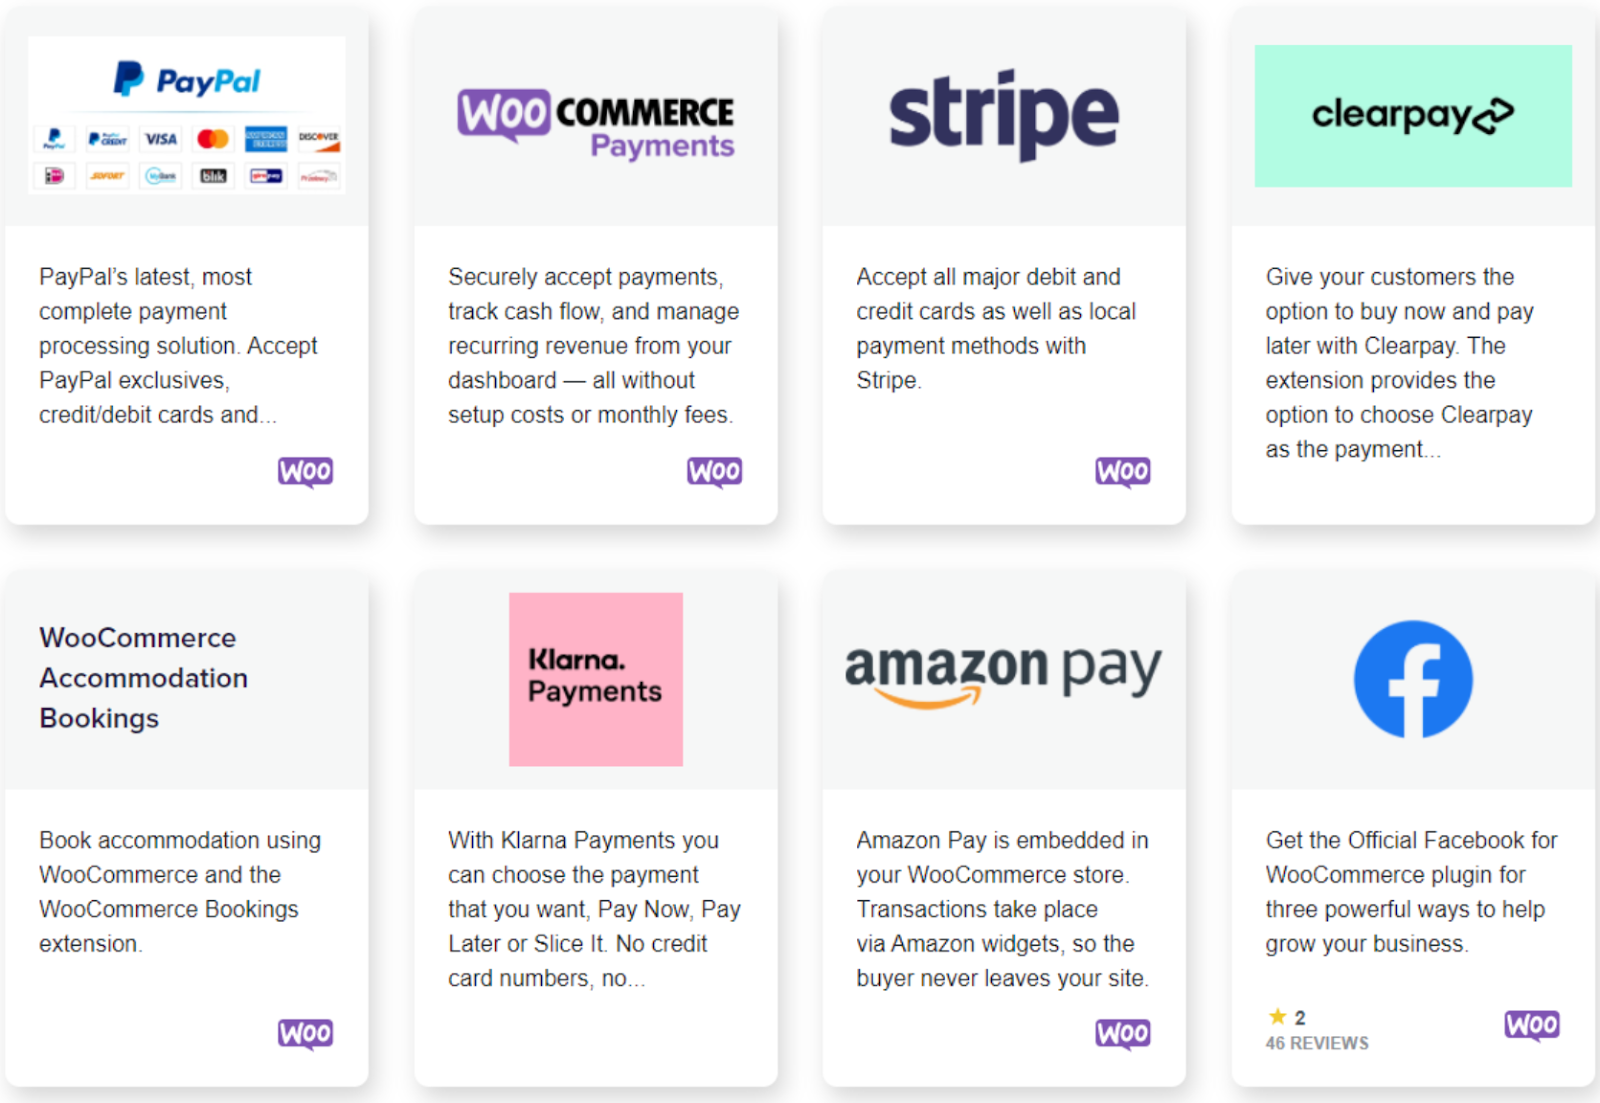 WooCommerce Extensions